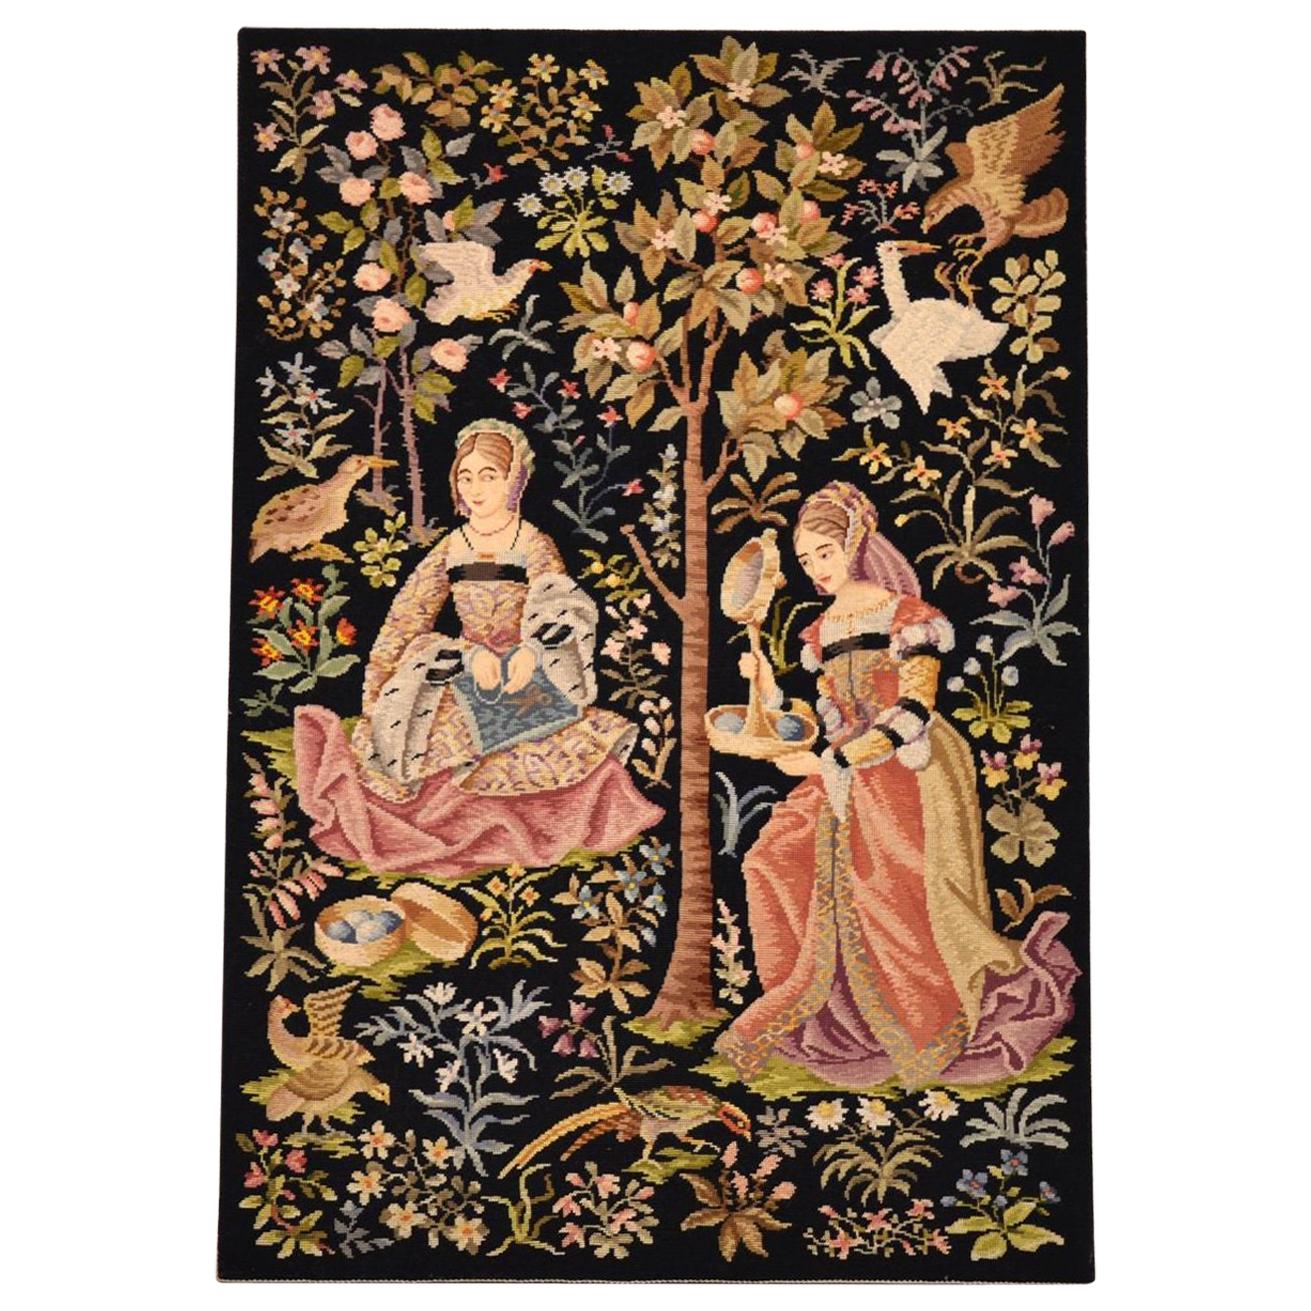 Antique Hand Stitched Tapestry